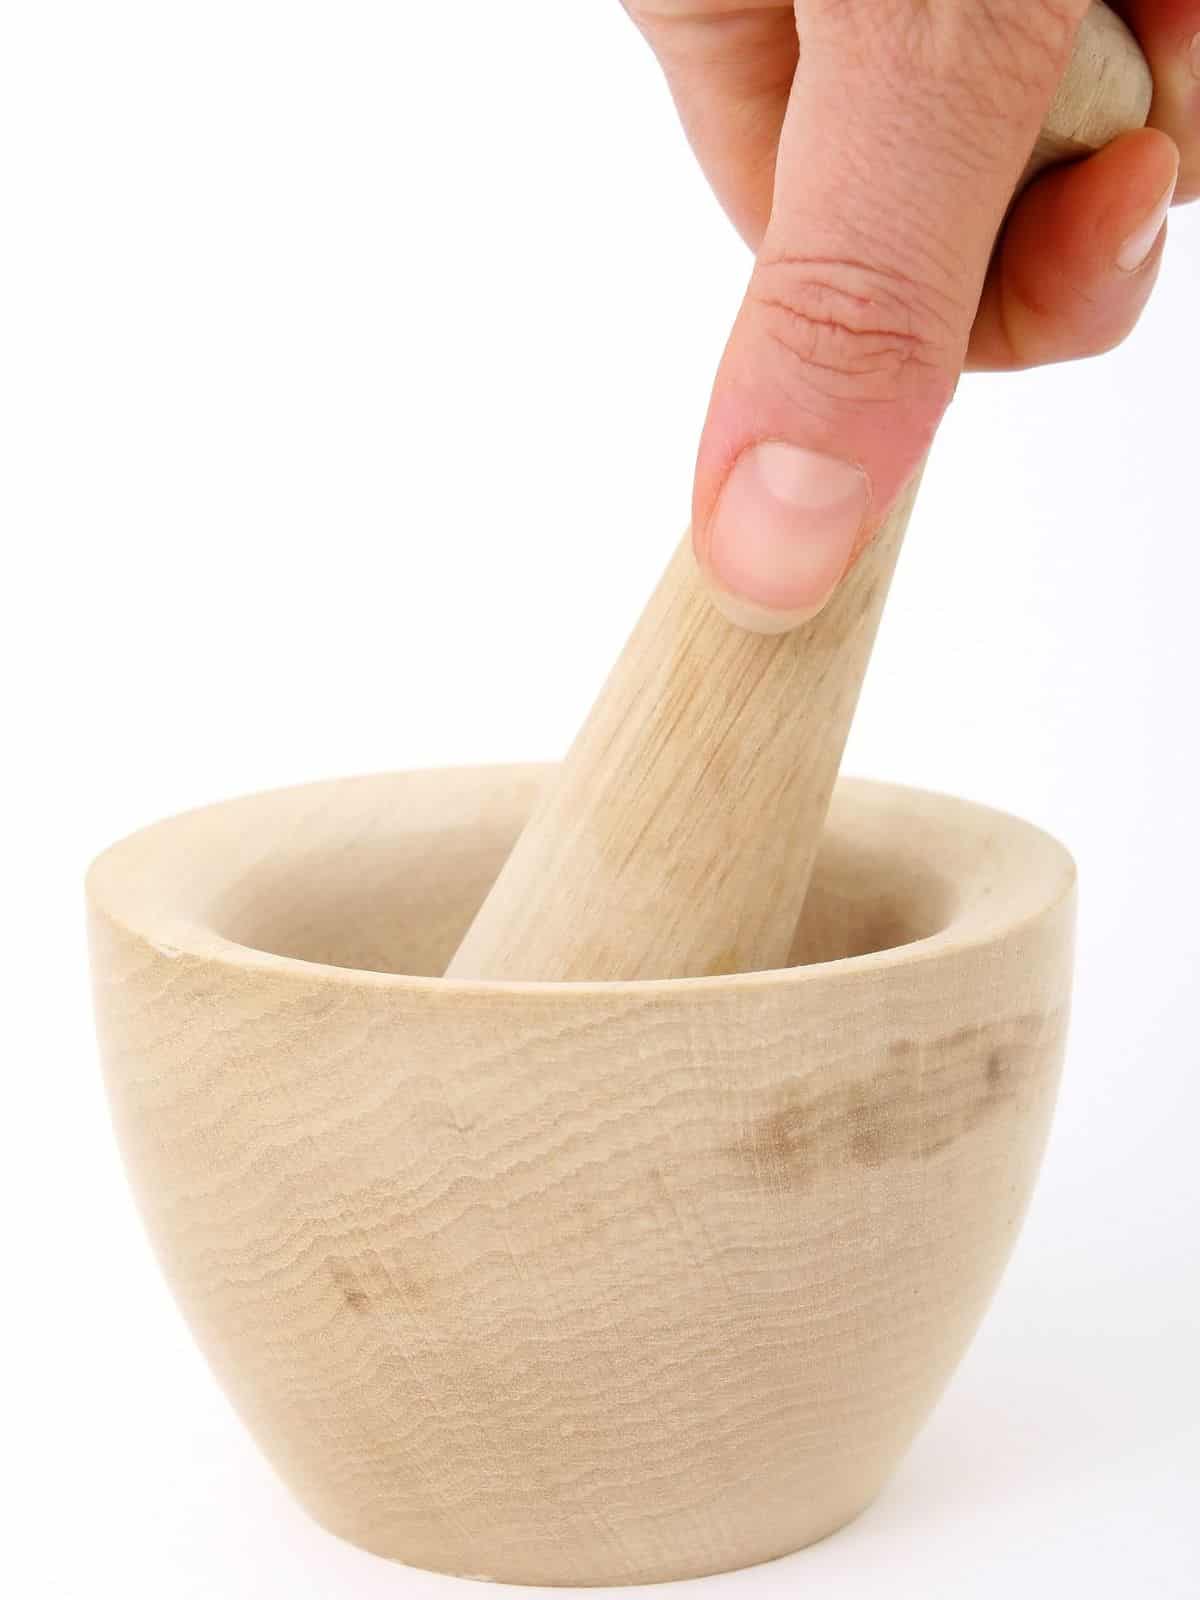 pestle being held in a mortar bowl.